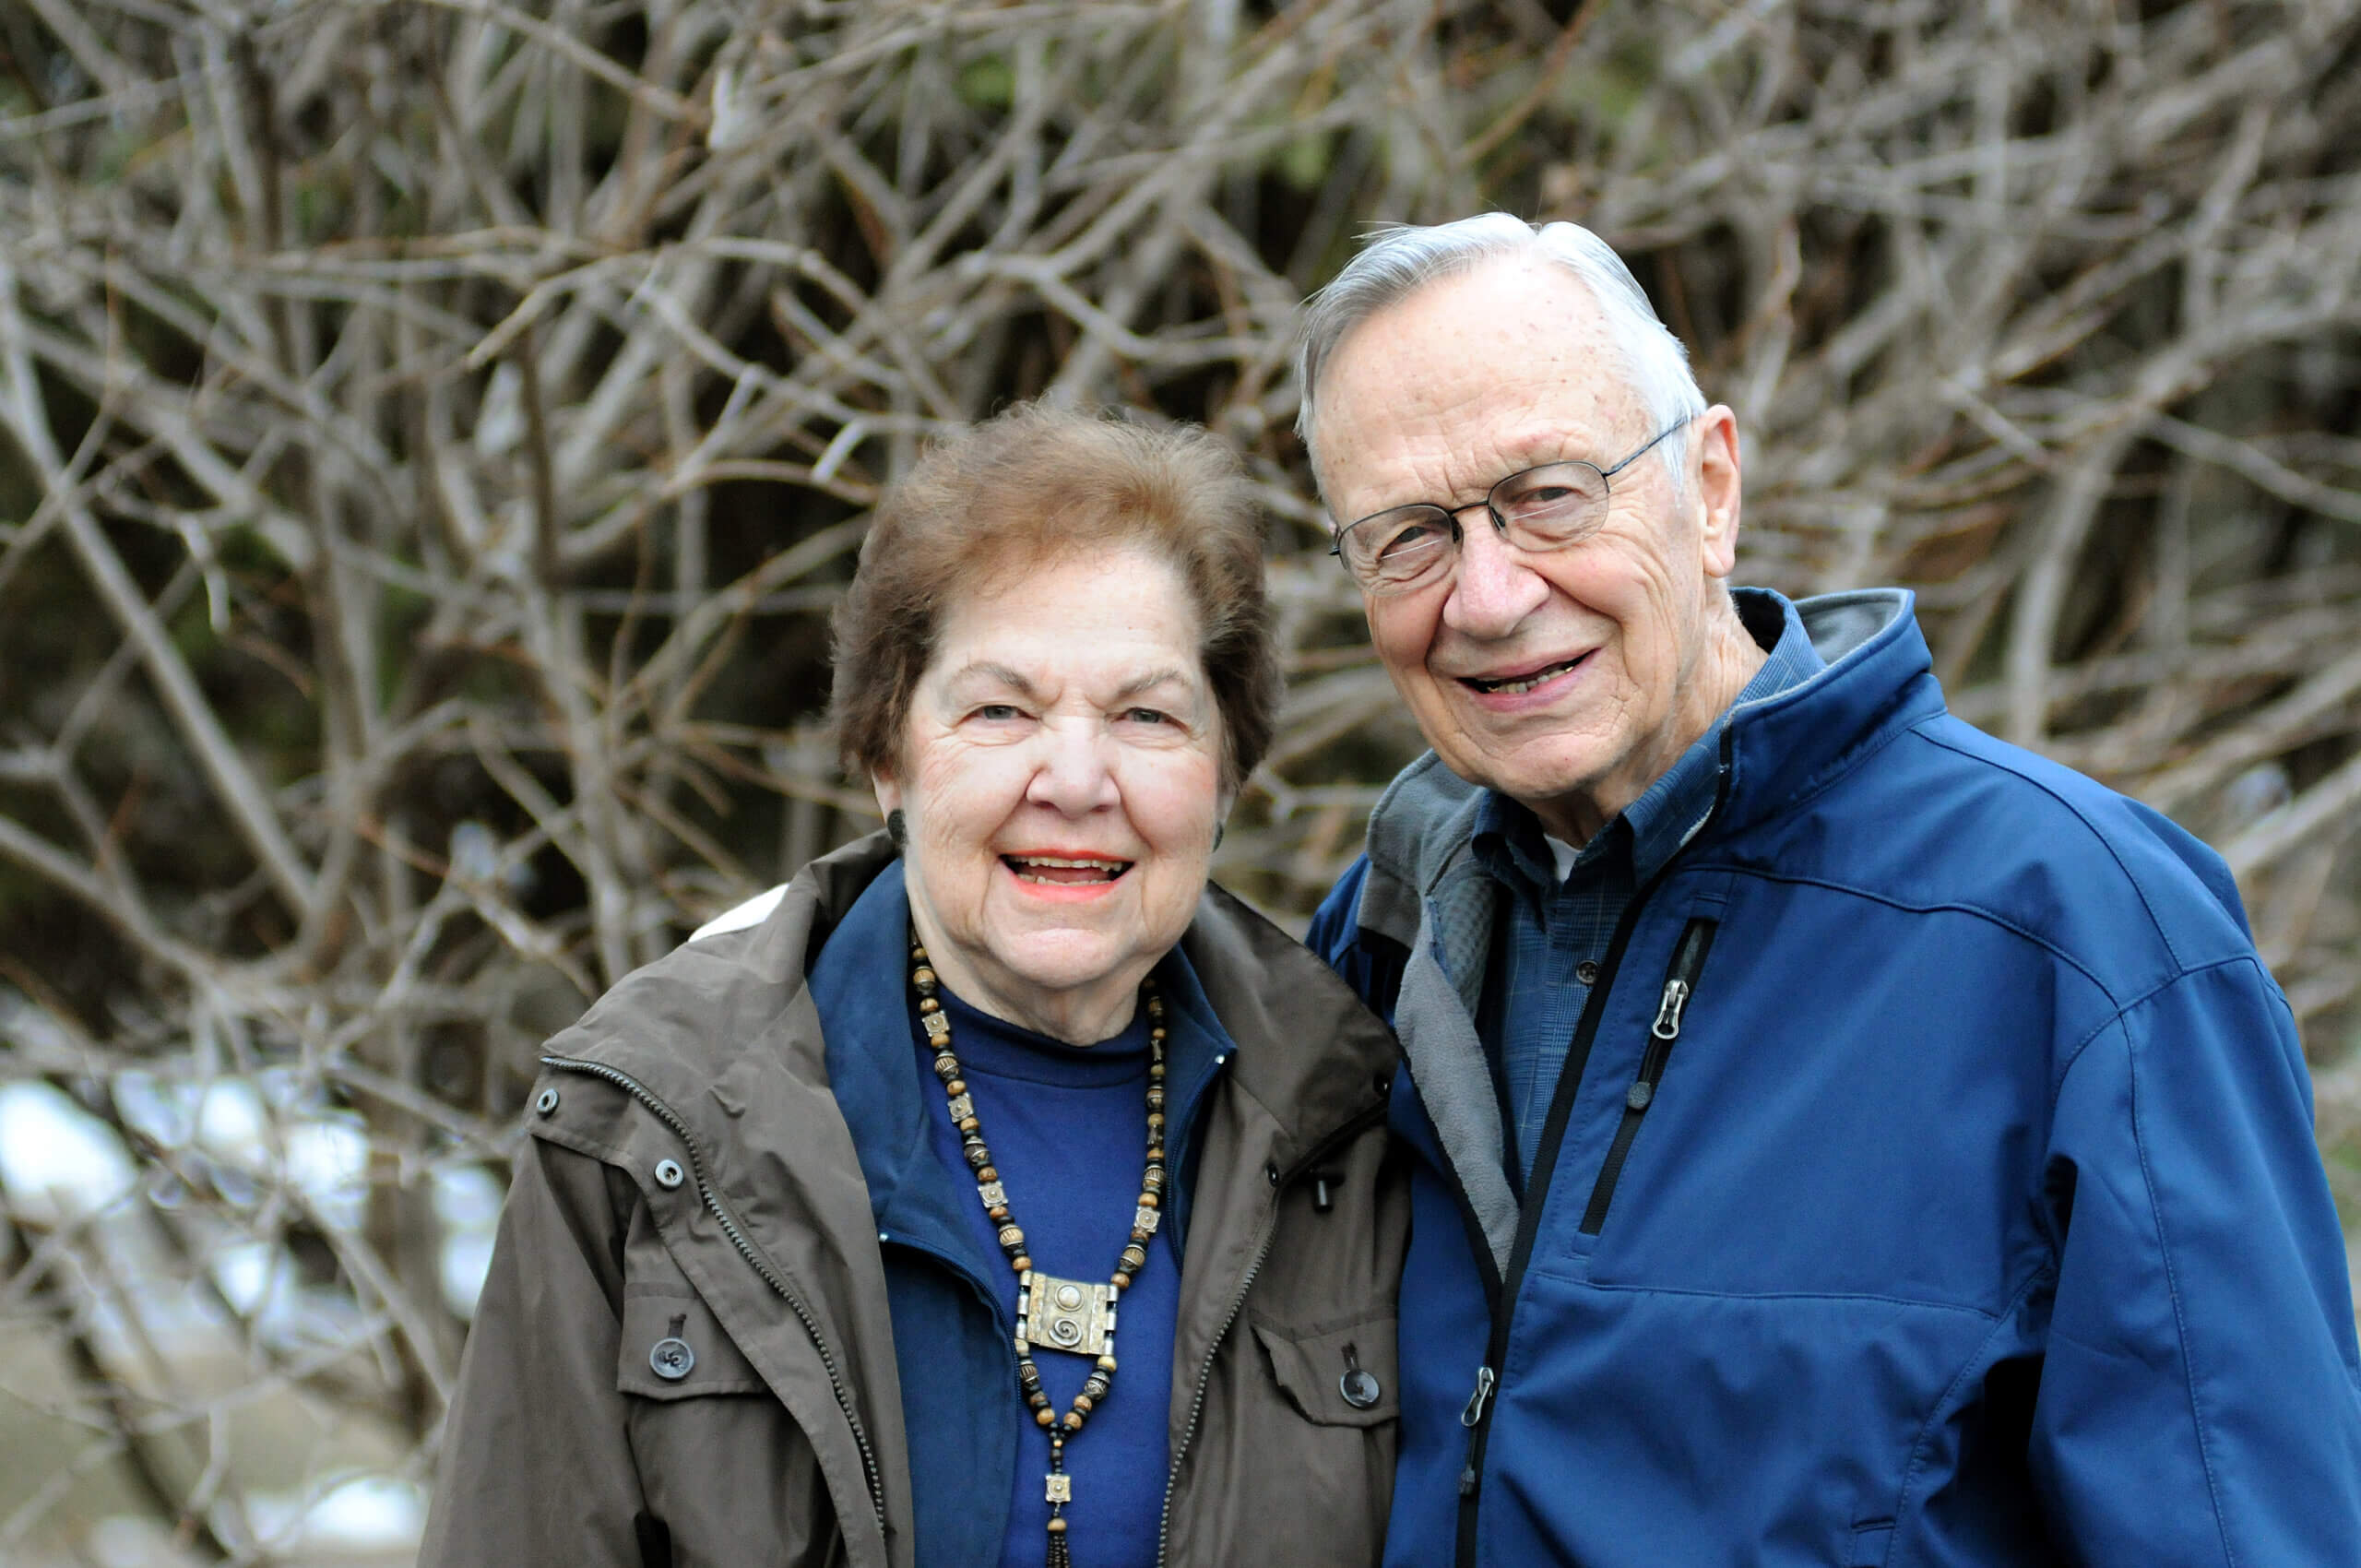 Don and Barb Frank, Recipients of the 2023 Forever Friends Award